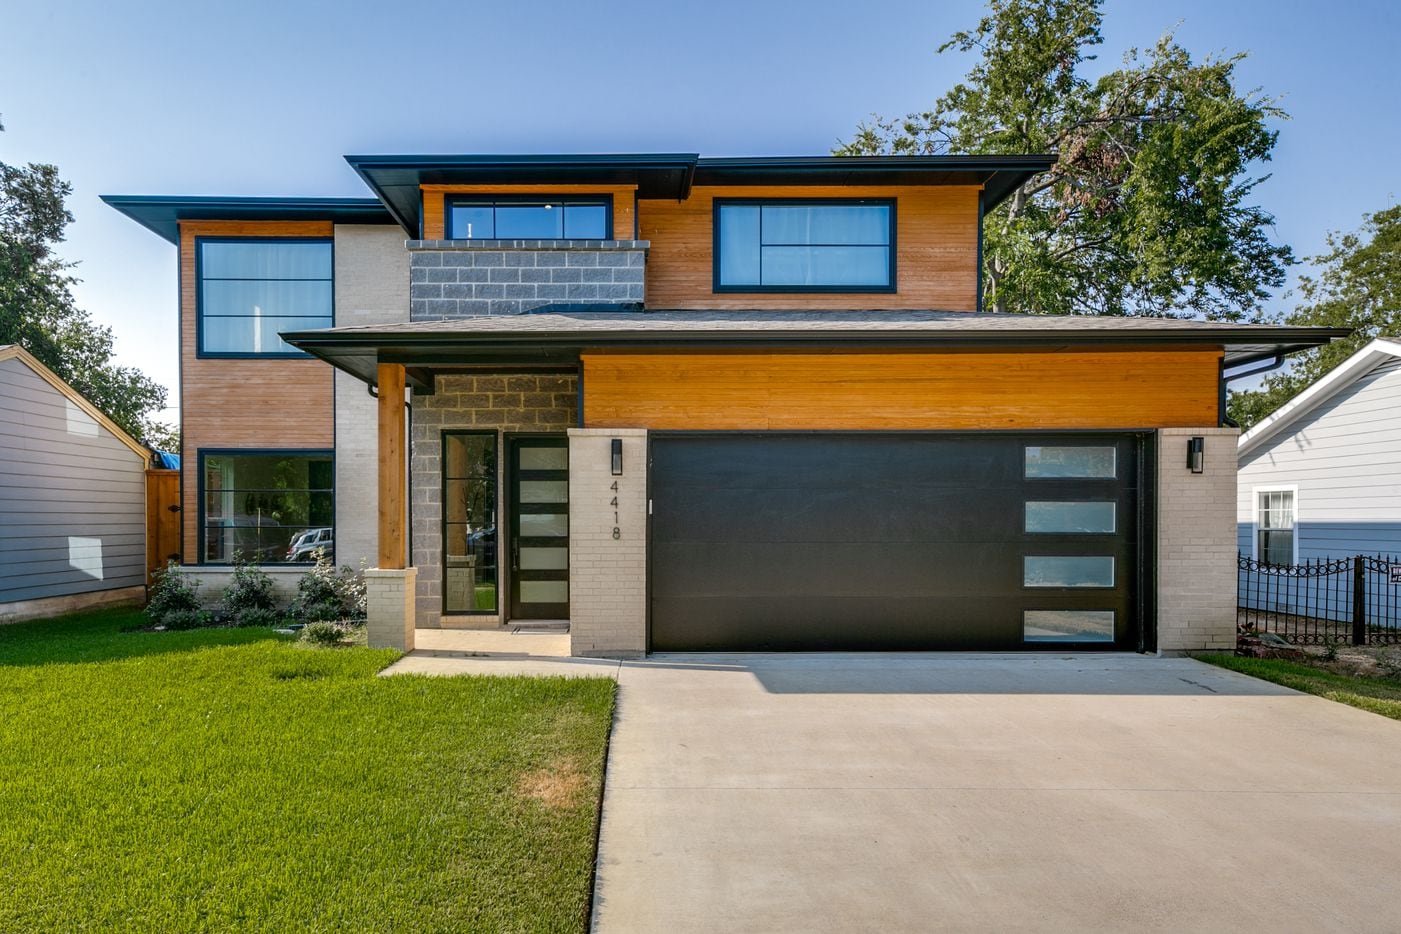 Here’s what you can buy in the Dallas home market with a 1 million budget